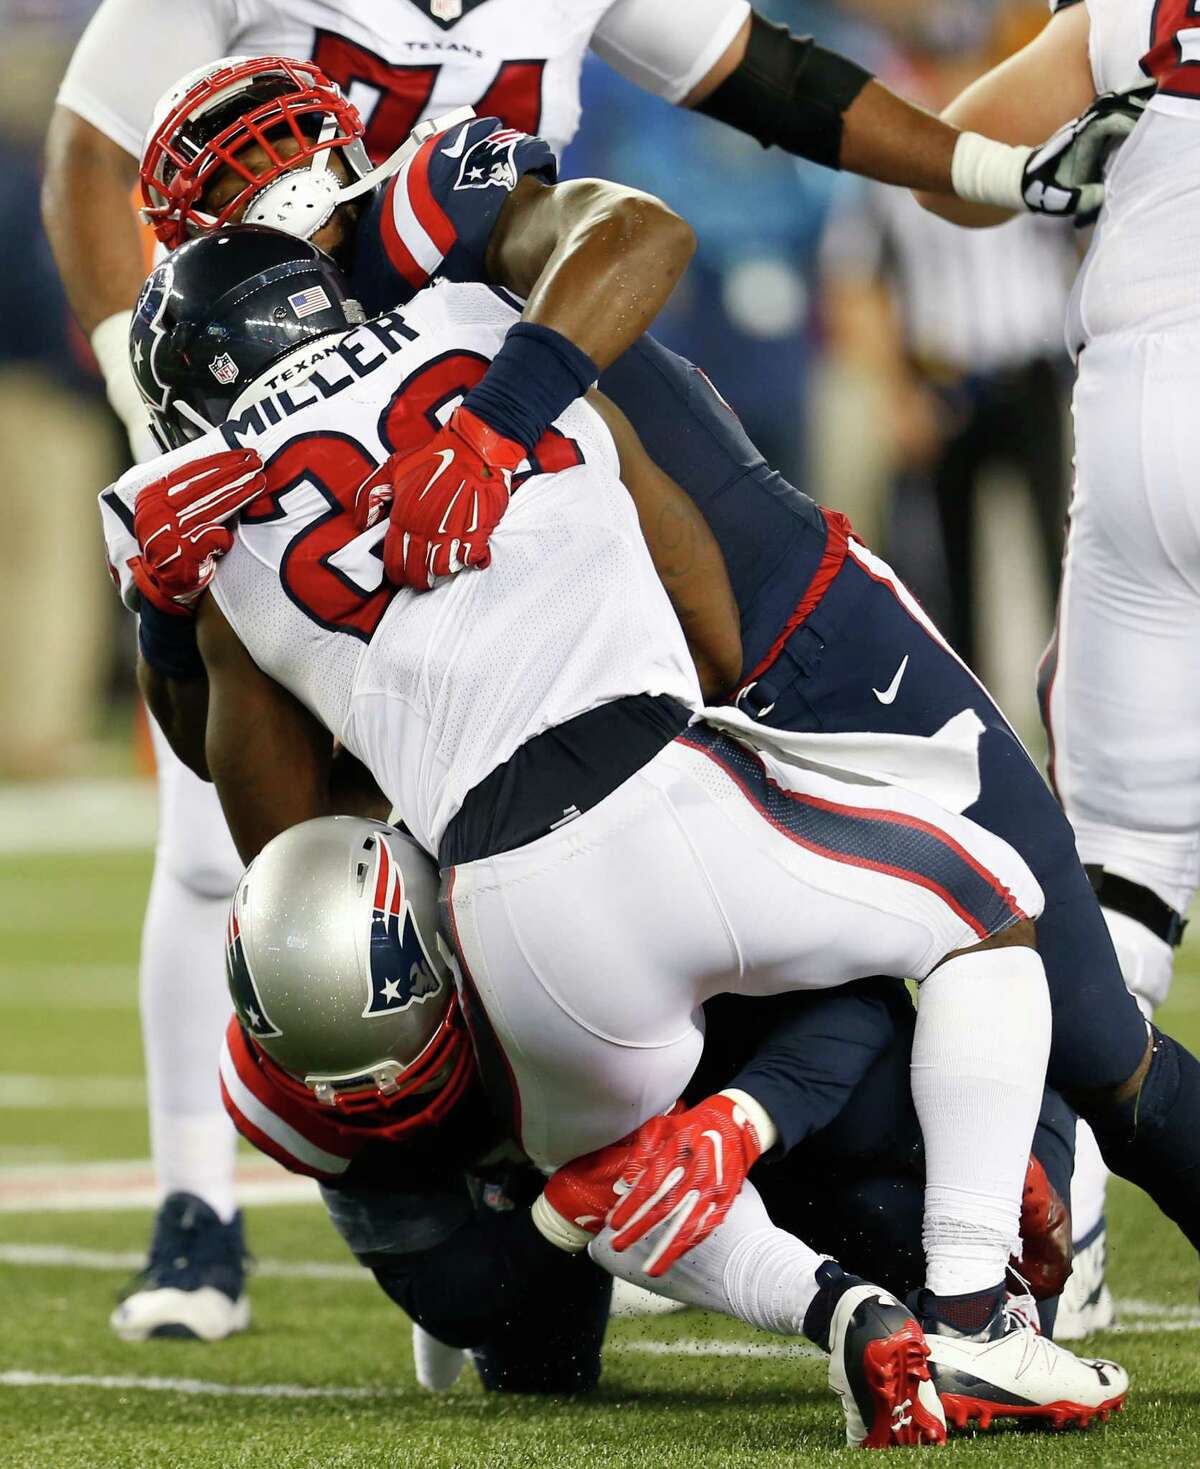 Houston Texans running back Lamar Miller is stopped at the line of scrimmage by New England Patriots outside linebacker Jamie Collins (91) and linebacker Barkevious Mingo (51) during the fourth quarter at Gillette Stadium on Sept. 22, 2016, in Foxborough, Mass.